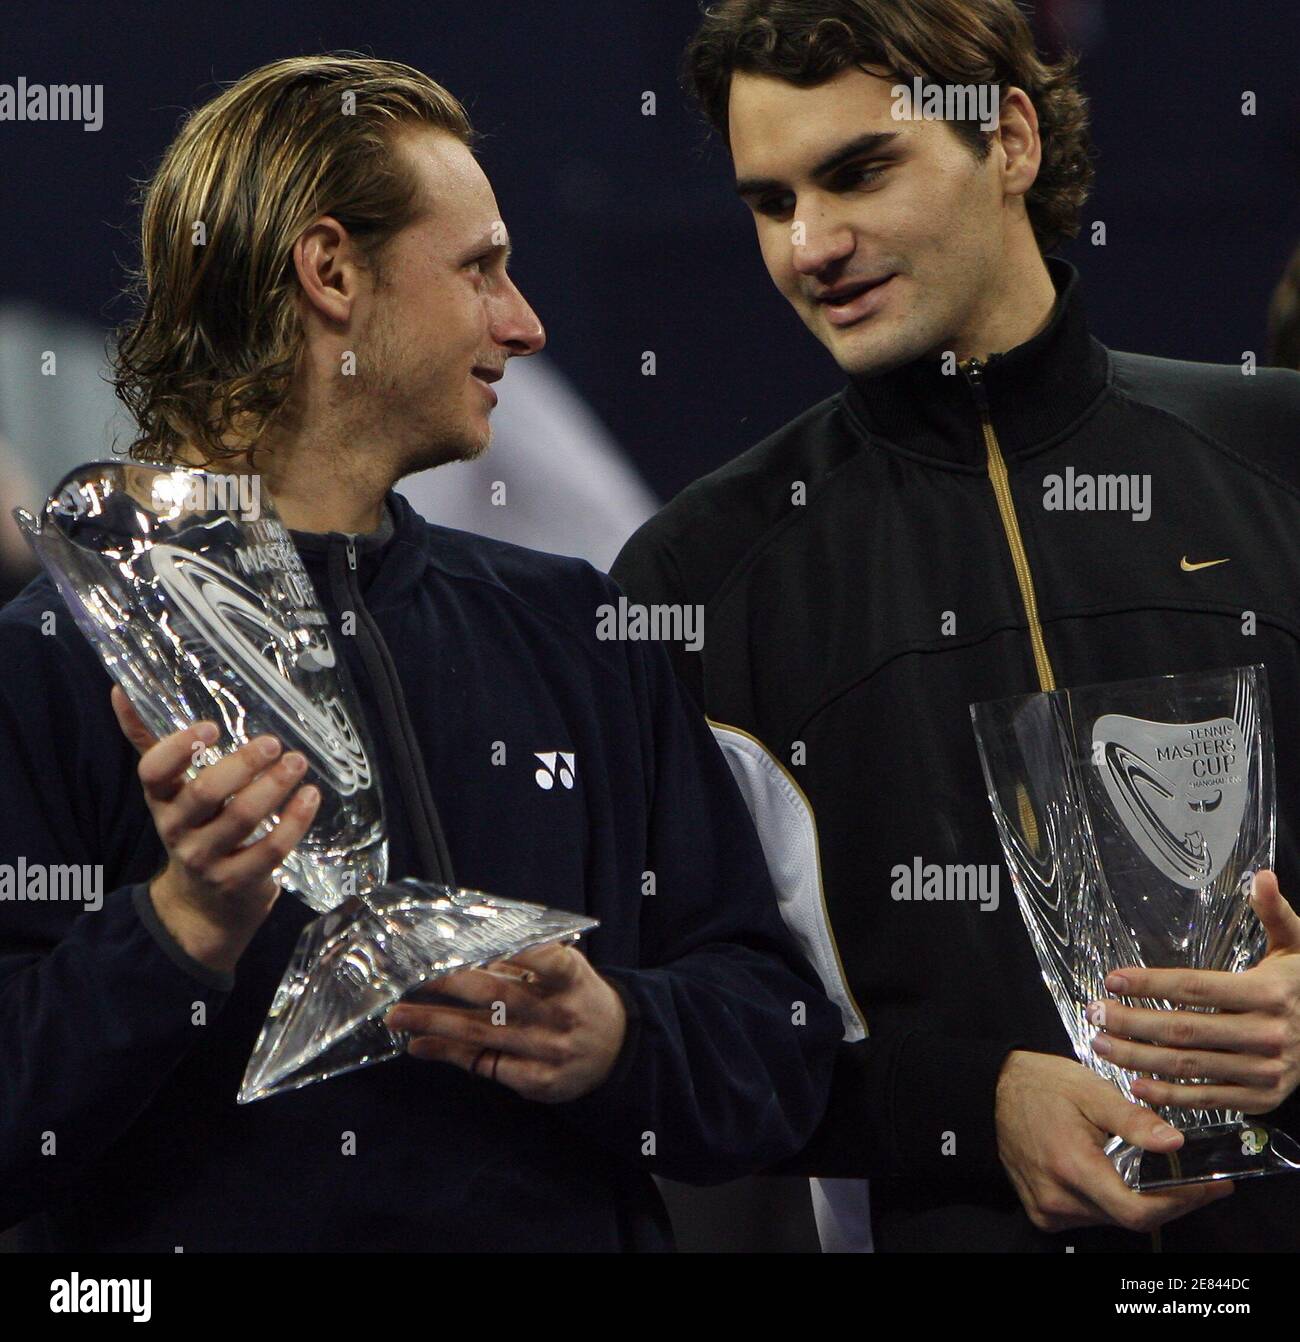 David Nalbandian of Argentina (L), winner of the Tennis Masters Cup in  Shanghai, chats with Roger Federer of Switzerland (R) at the end of their  match November 20, 2005. Nalbandian fought back